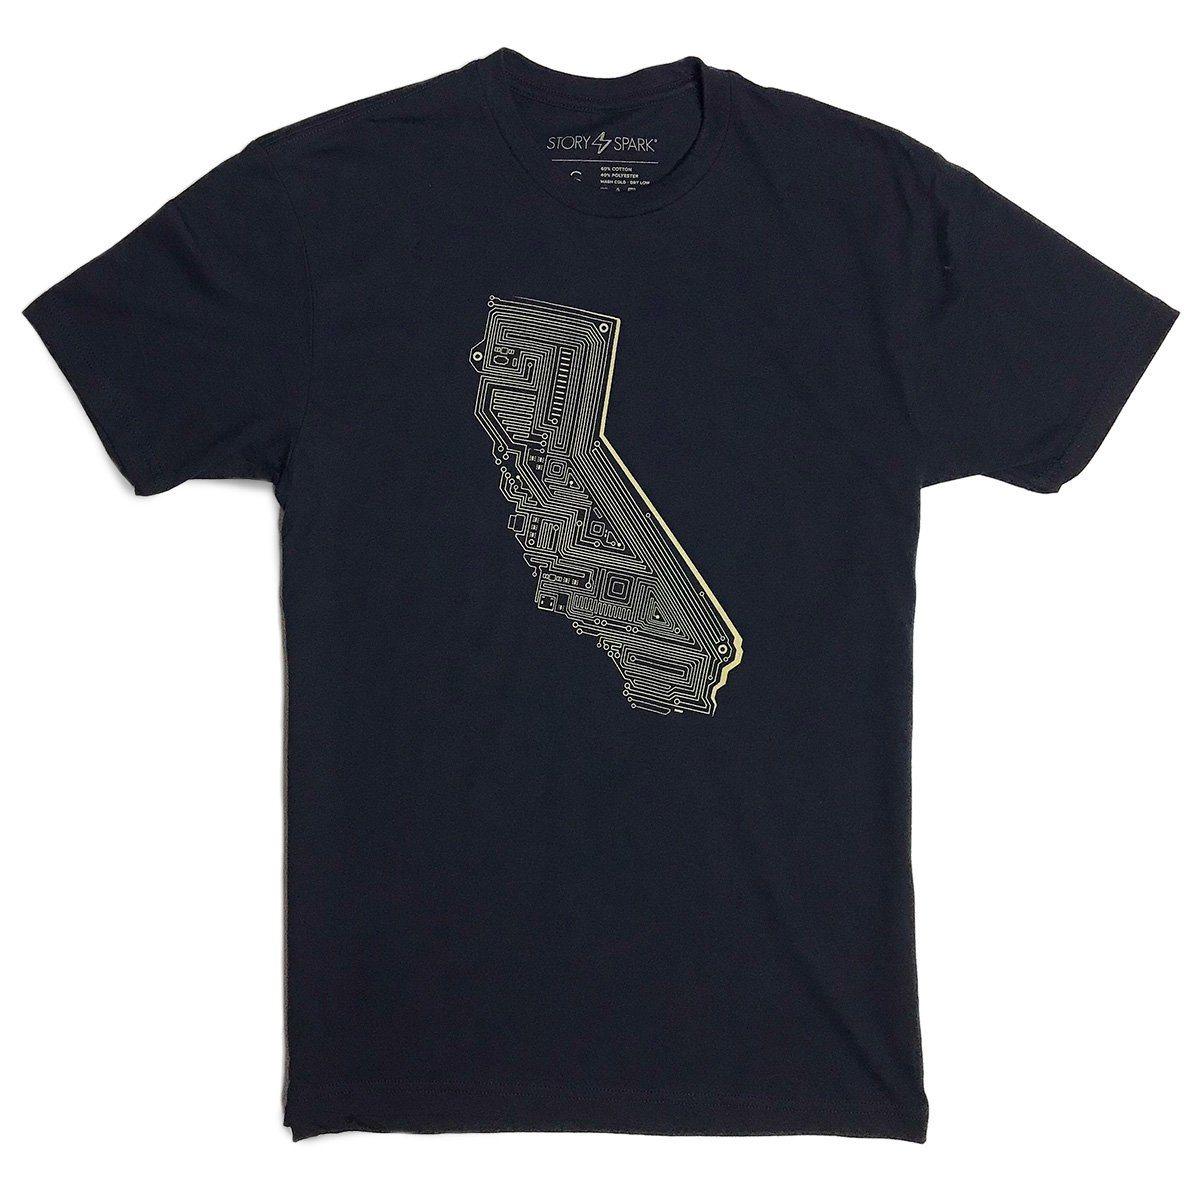 California Tech Mens Graphic T-shirt for Engineers, Techs and ...